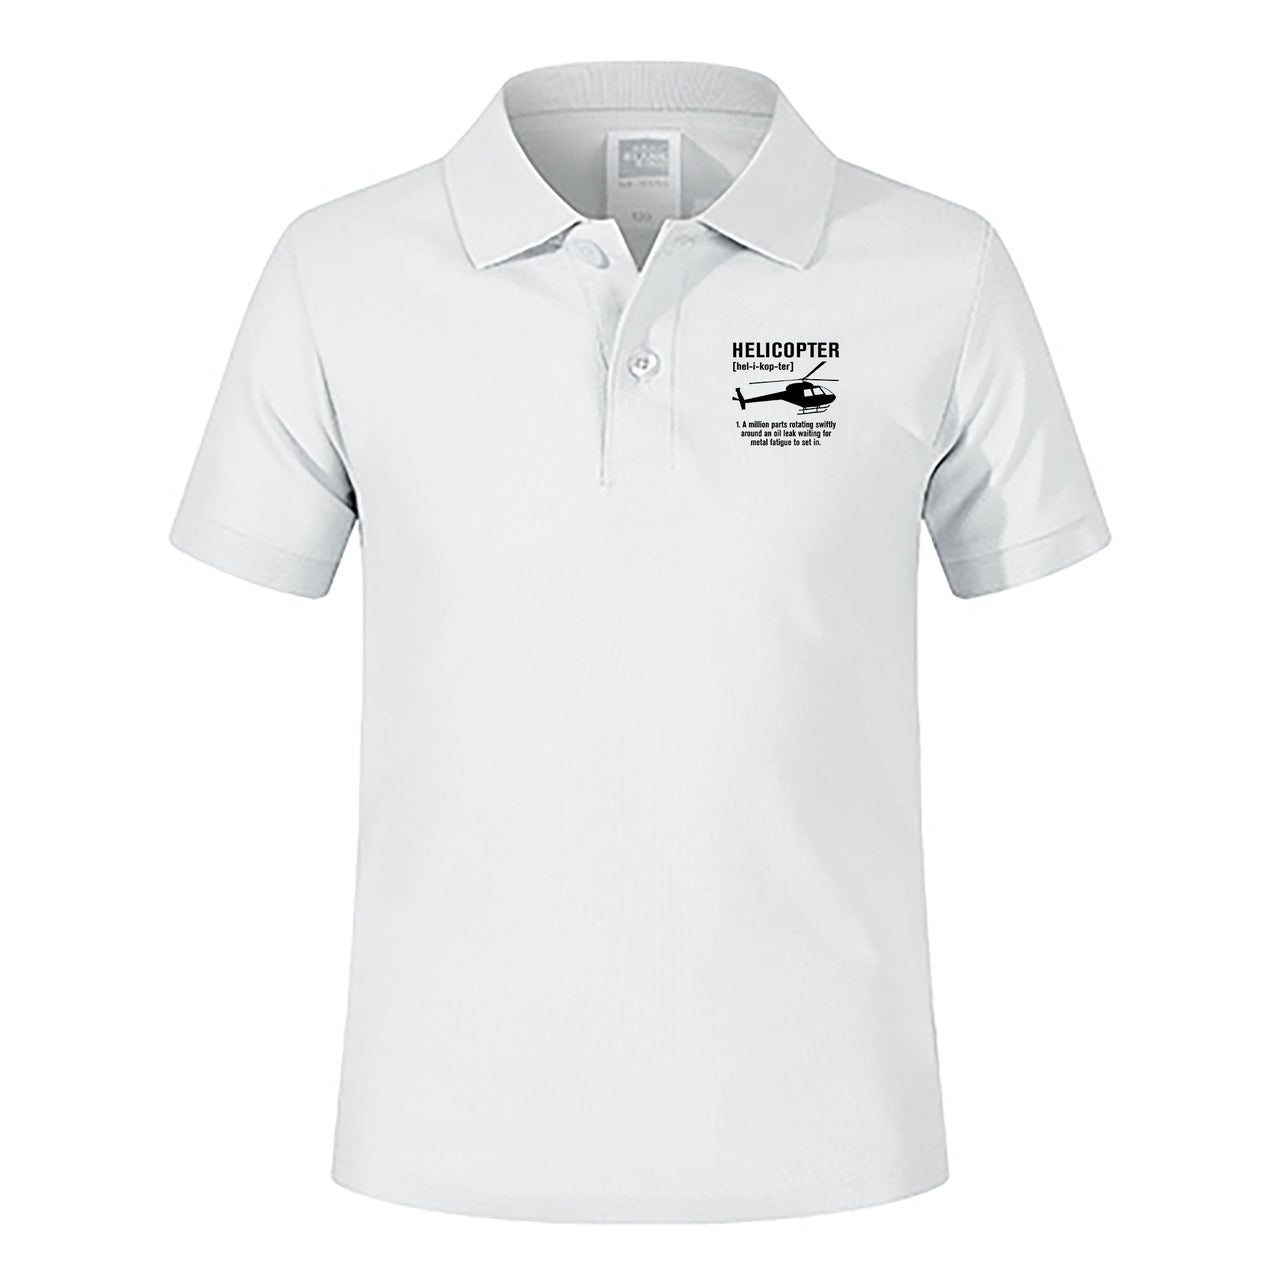 Helicopter [Noun] Designed Children Polo T-Shirts